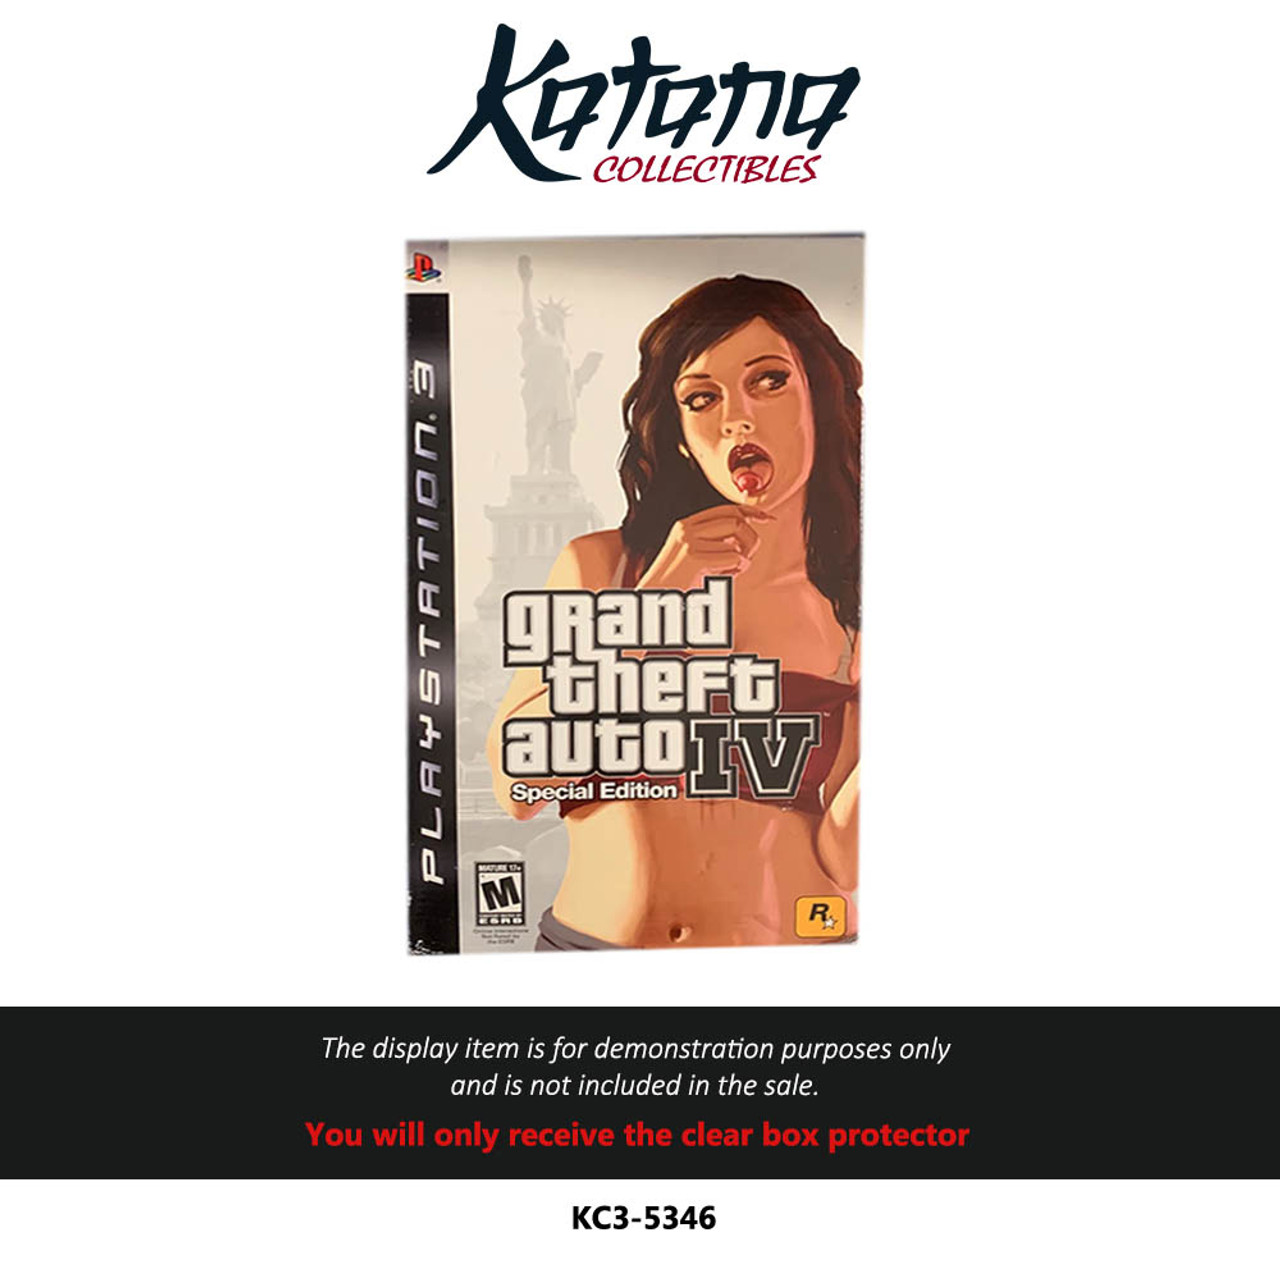 Katana Collectibles Protector For Grand Theft Auto IV Special Edition